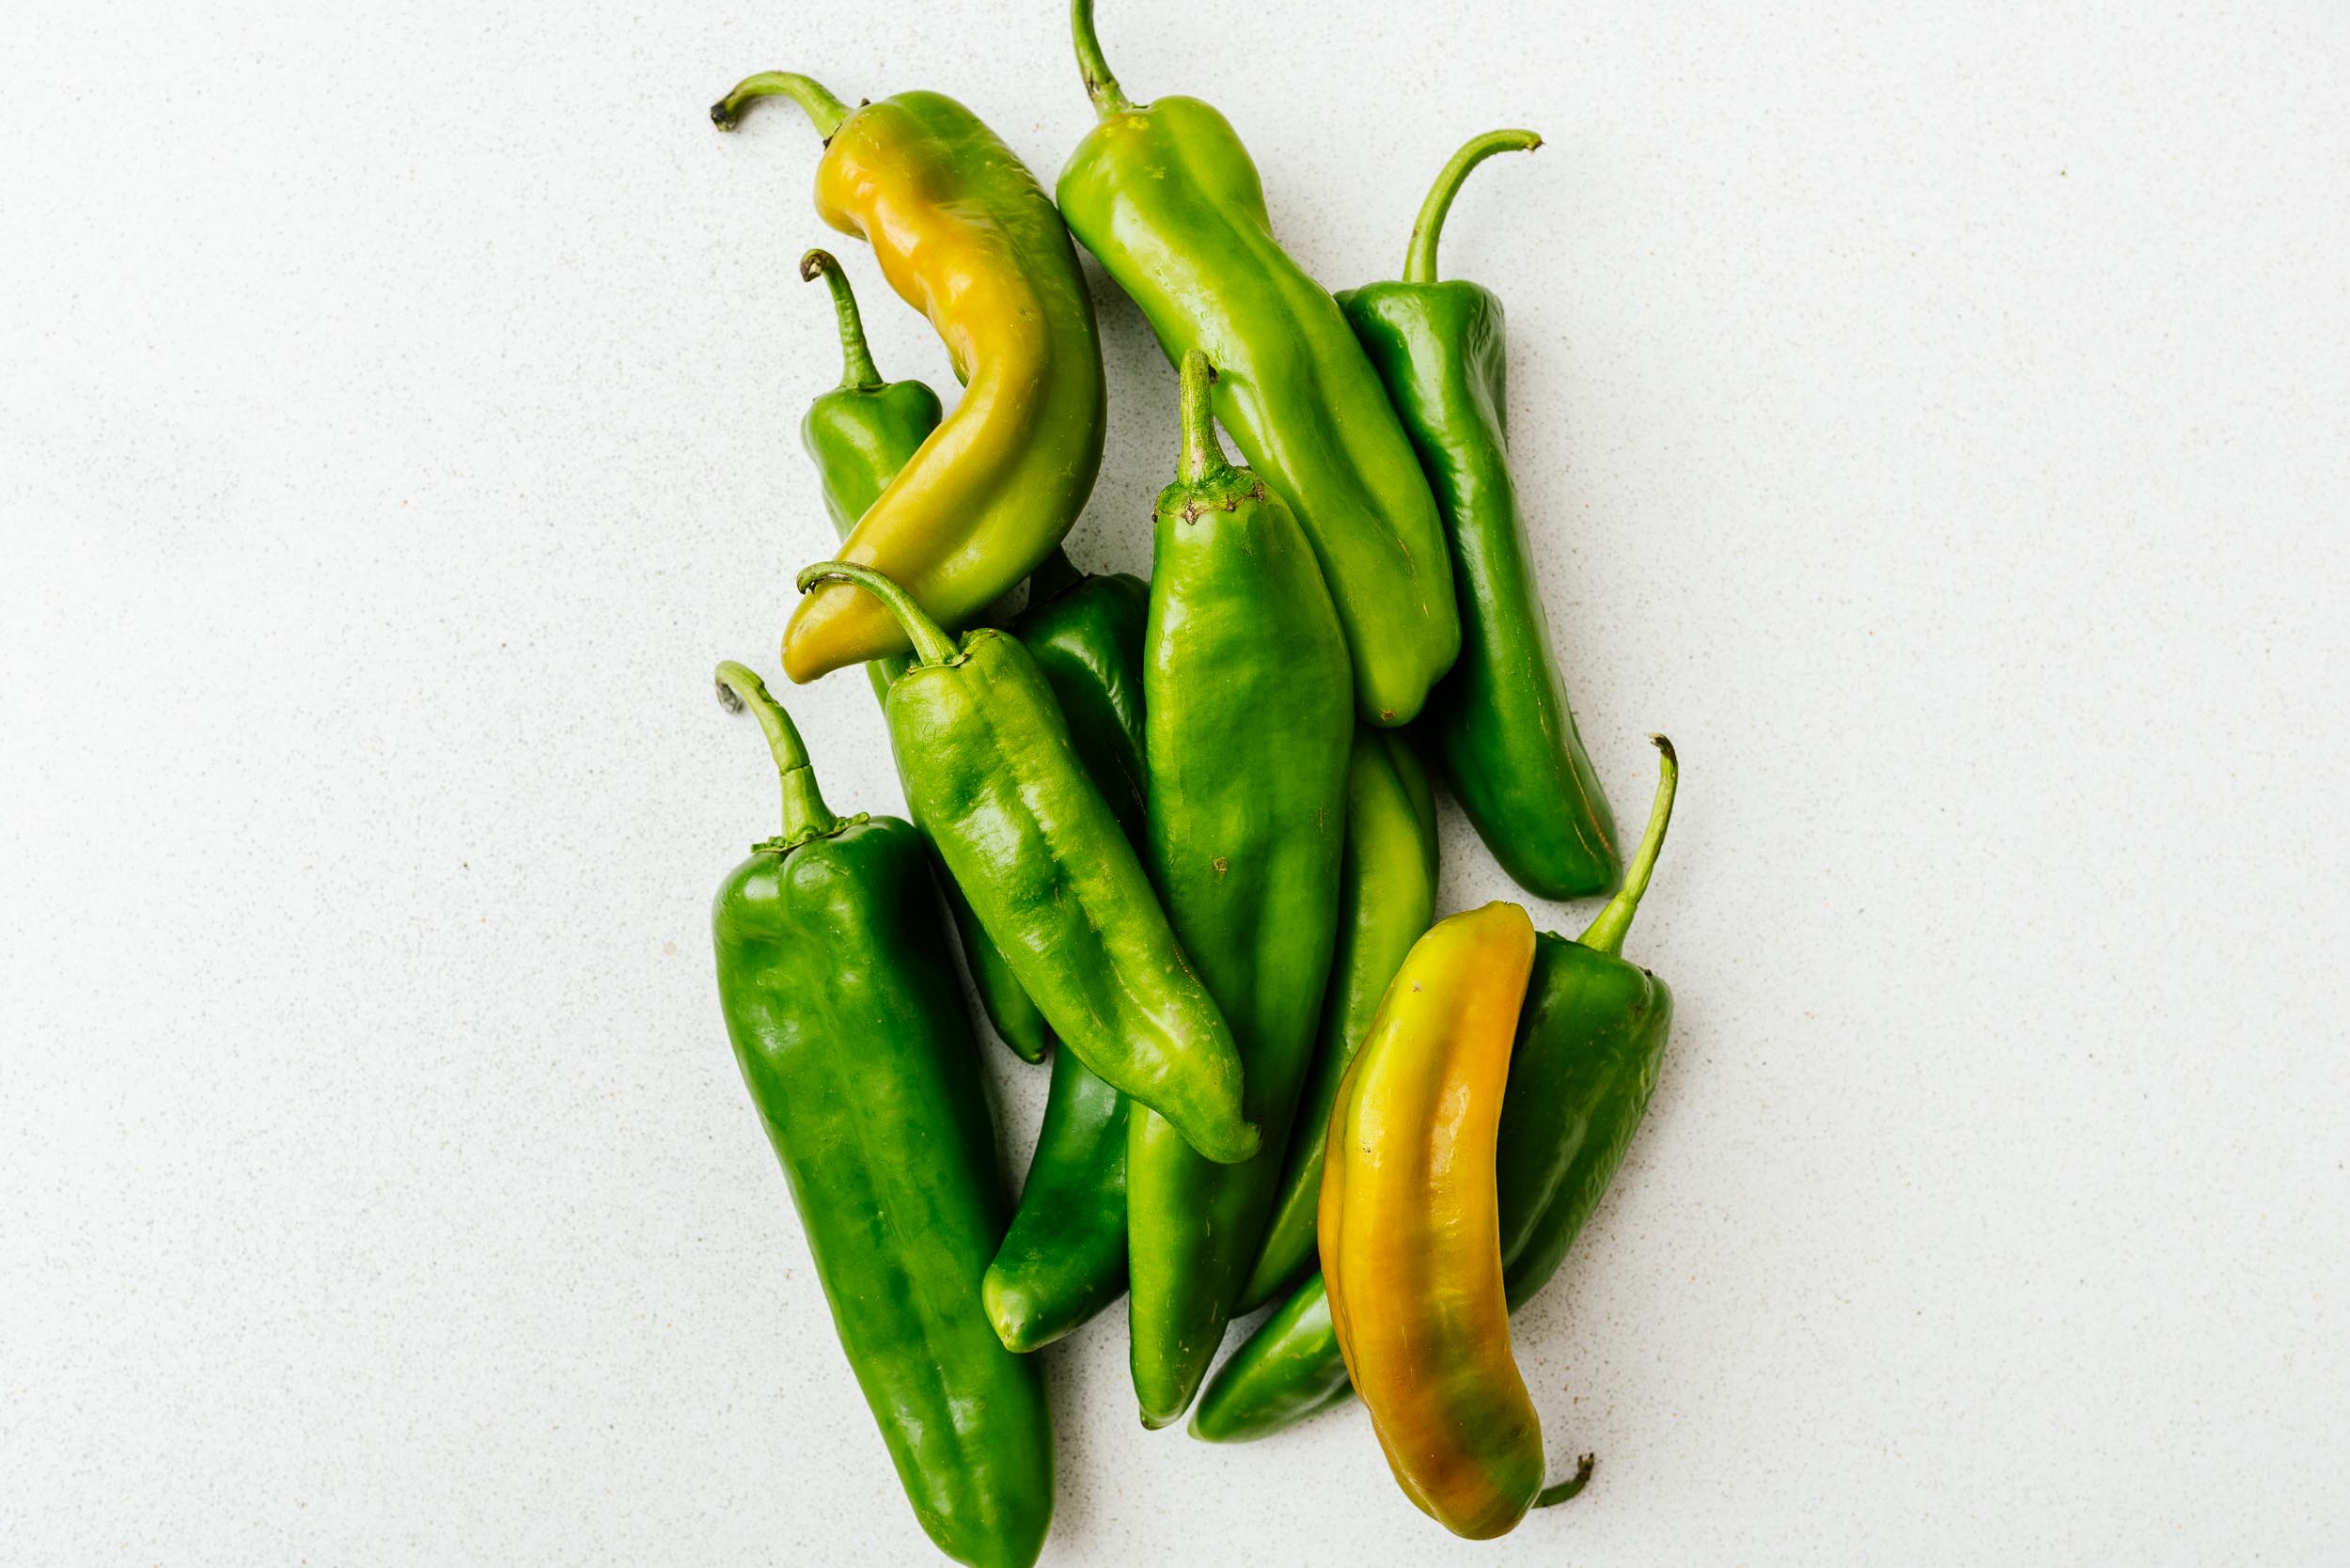 Hatch Chile: the green chile dreams are made of